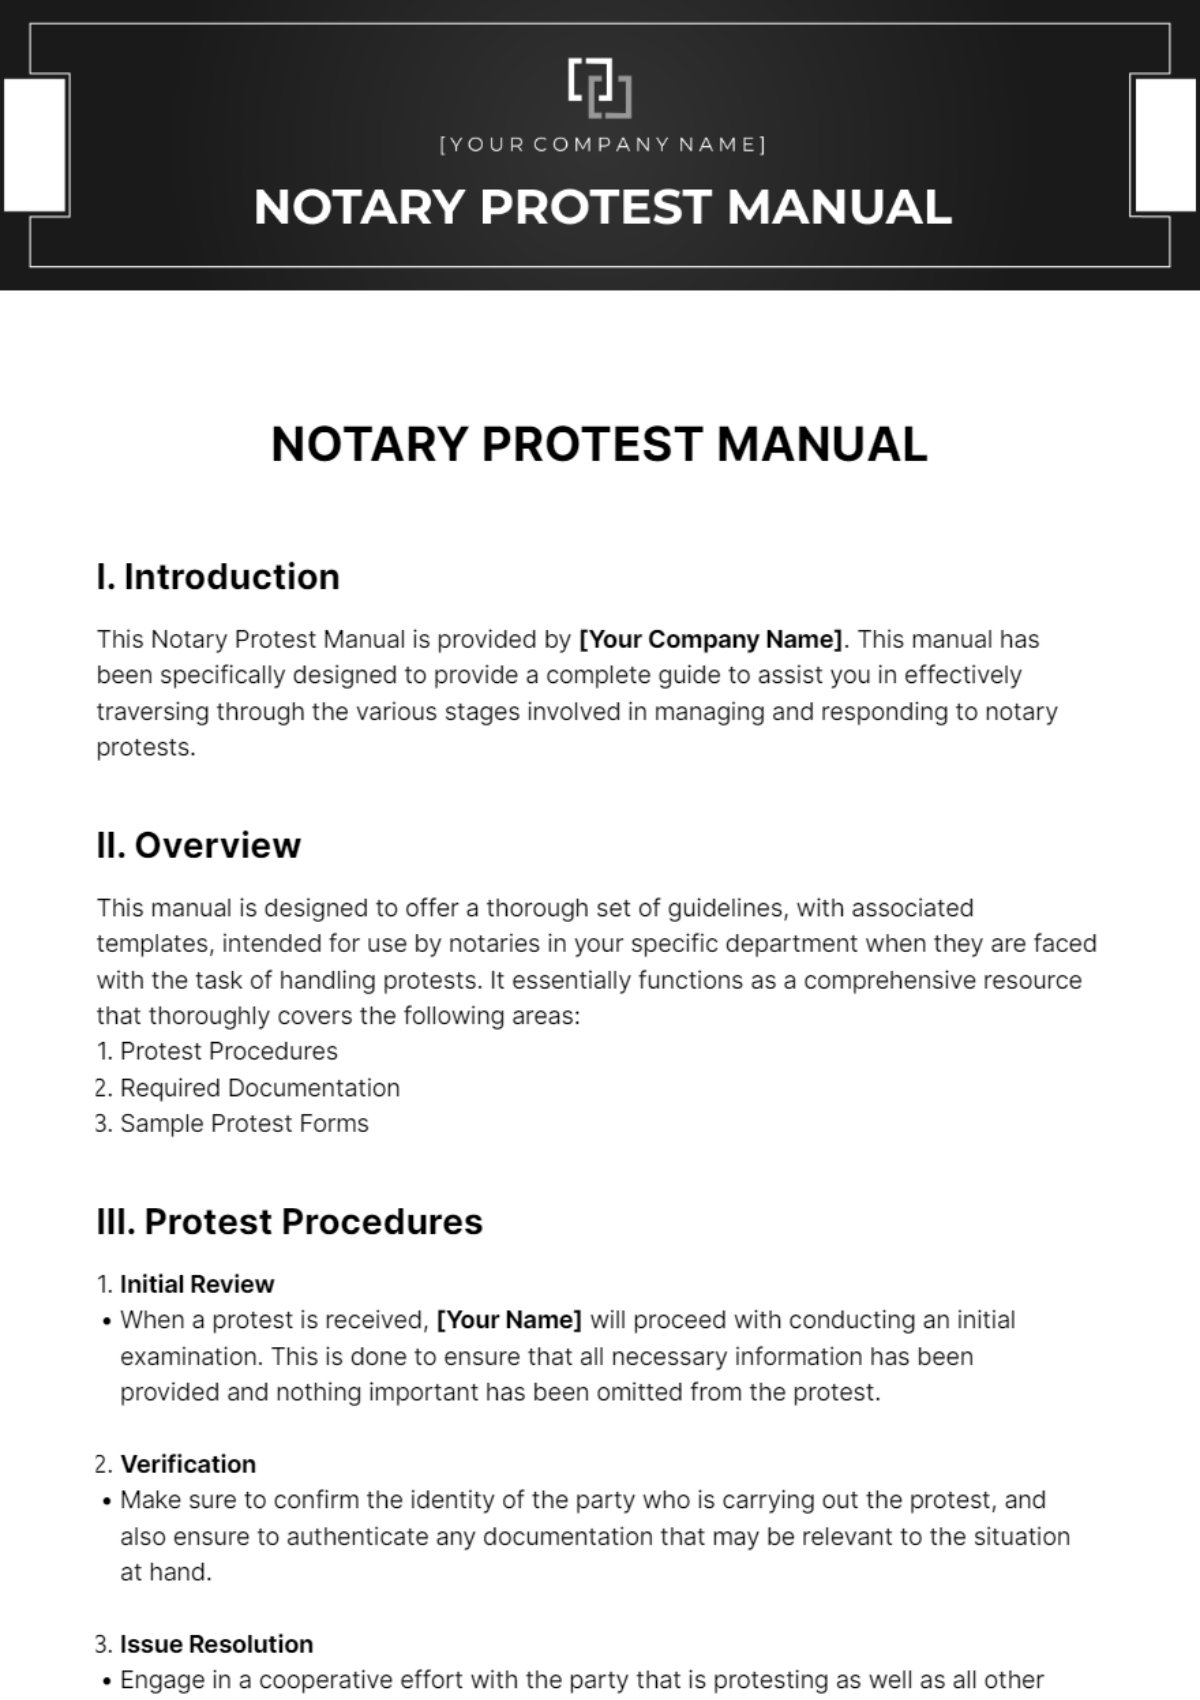 Notary Protest Manual Template